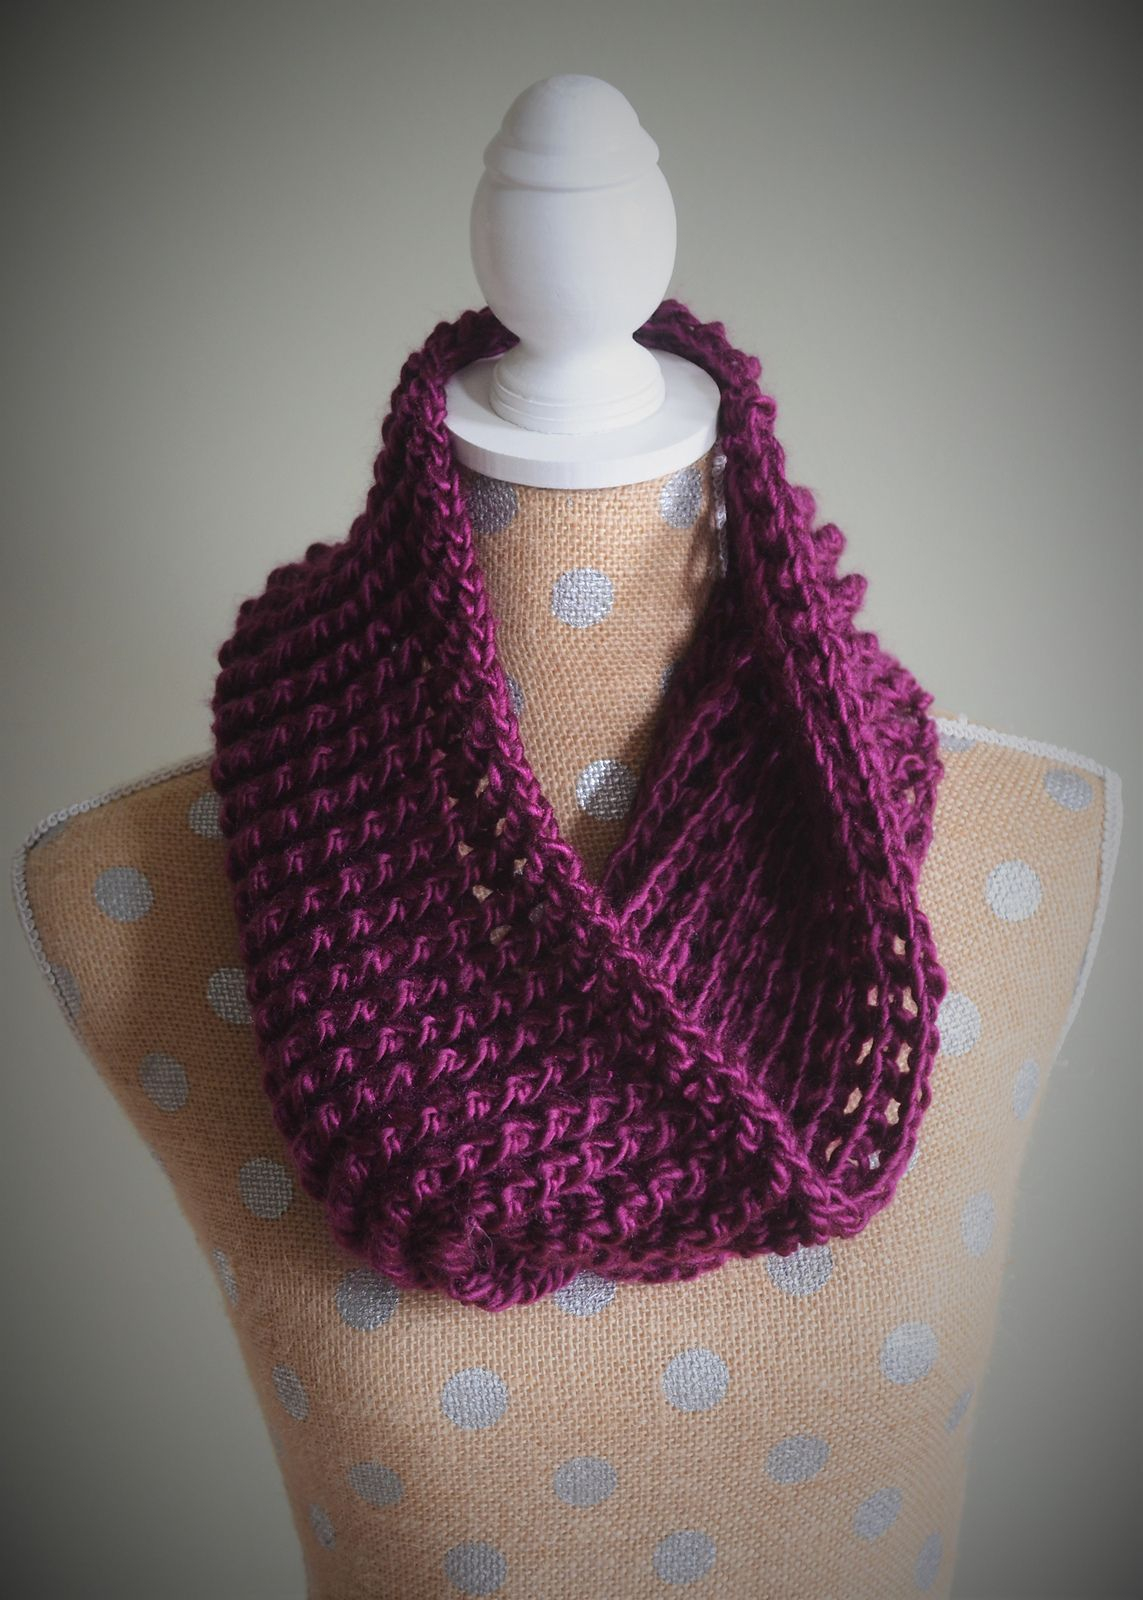 Lion Brand Free Crochet Patterns Make This Beautiful Cowl With Lion Brand Landscapes Free Crochet